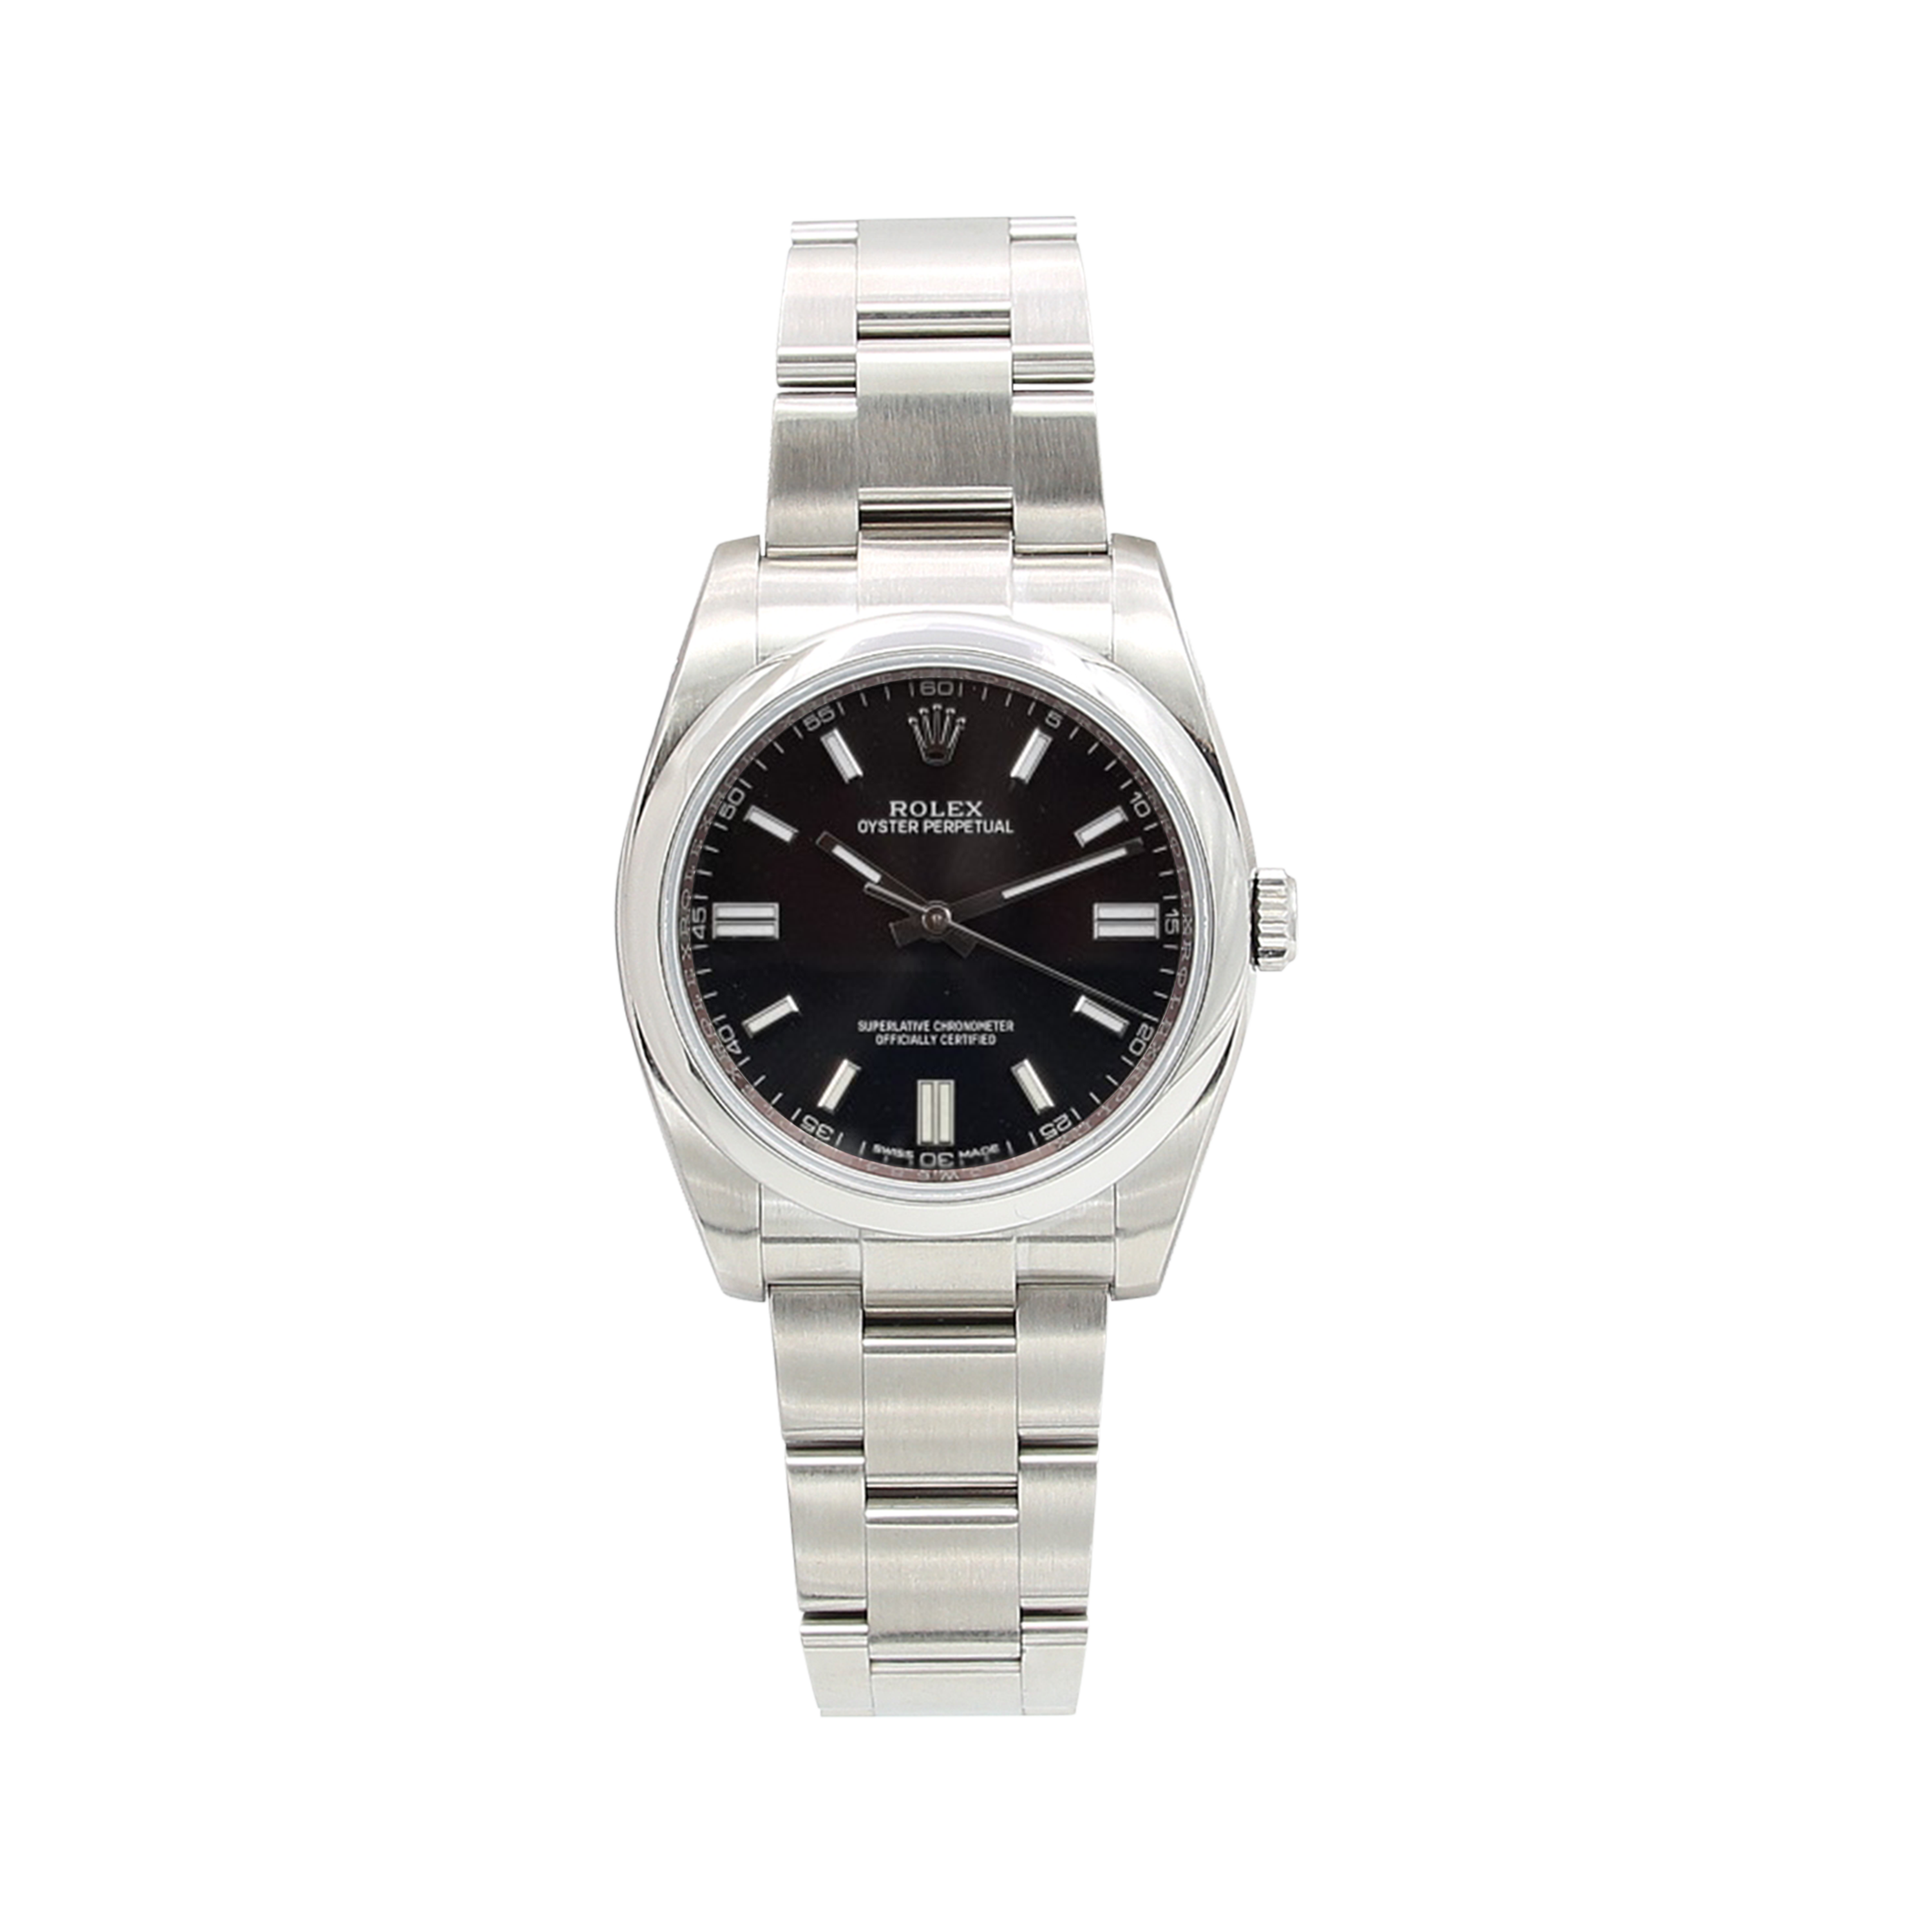 Rolex Oyster Perpetual ref. 116000 - Black Dial - Full Set